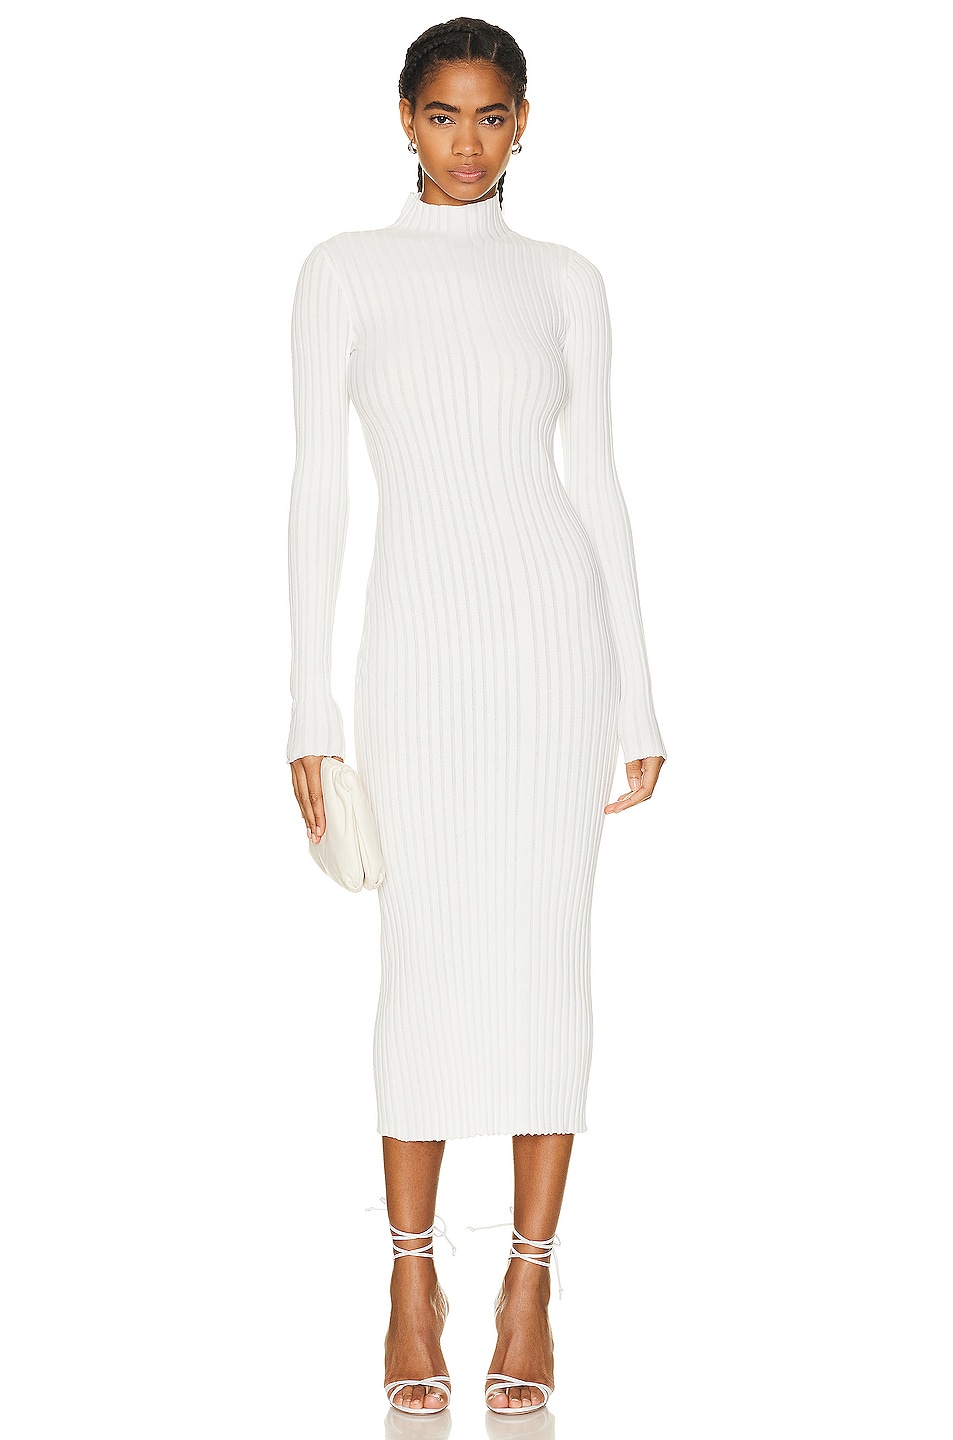 Interior Ridley Plated Dress in Future White | FWRD